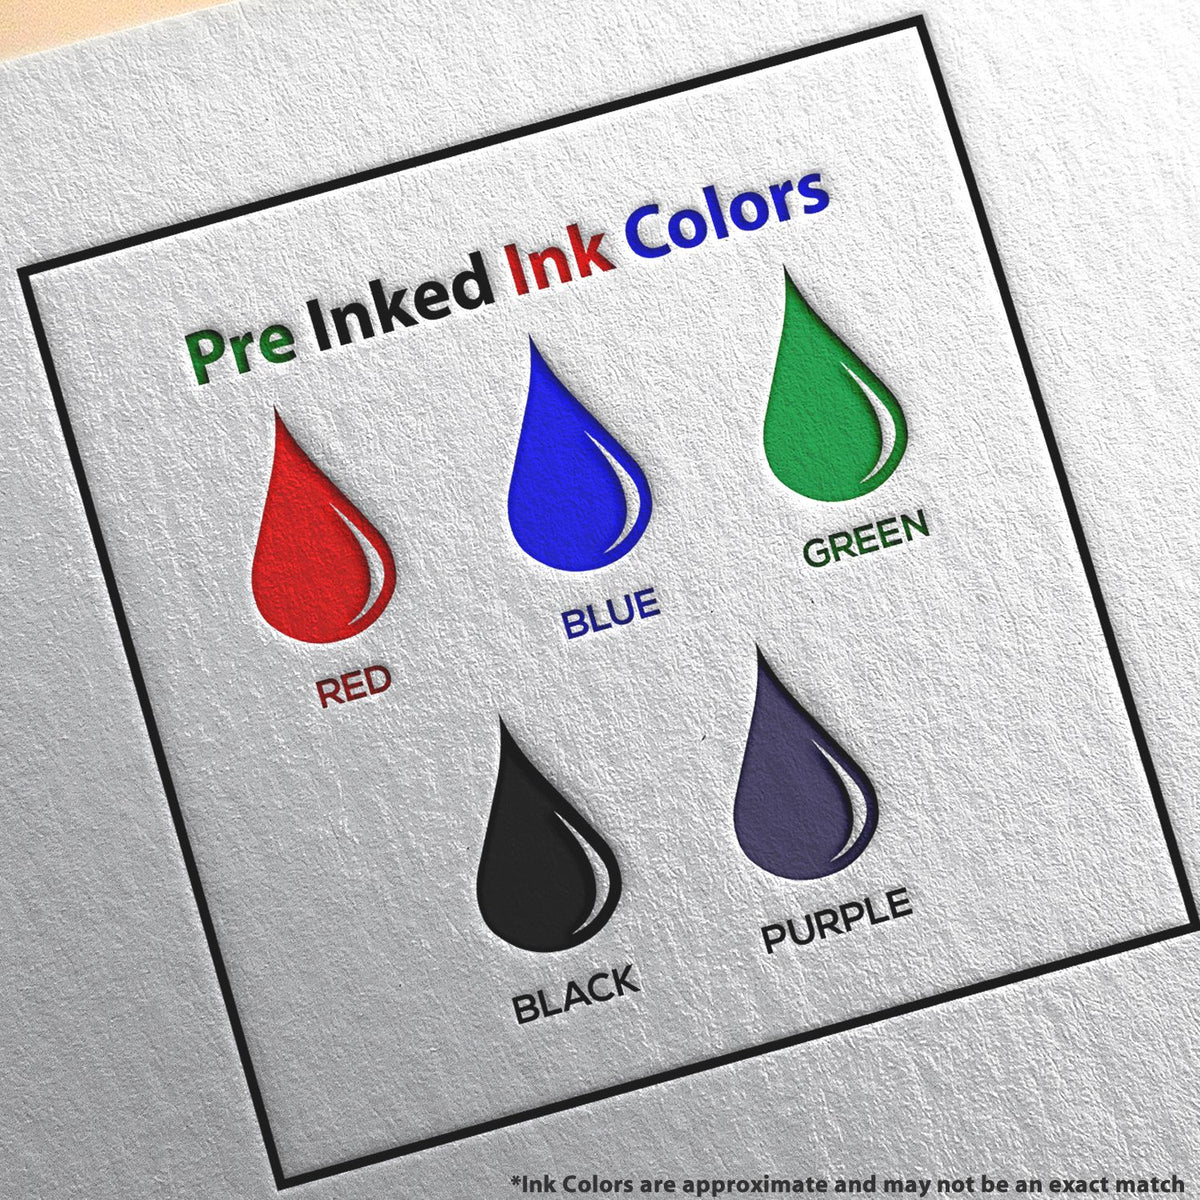 A picture showing the different ink colors or hues available for the Super Slim Vermont Notary Public Stamp product.